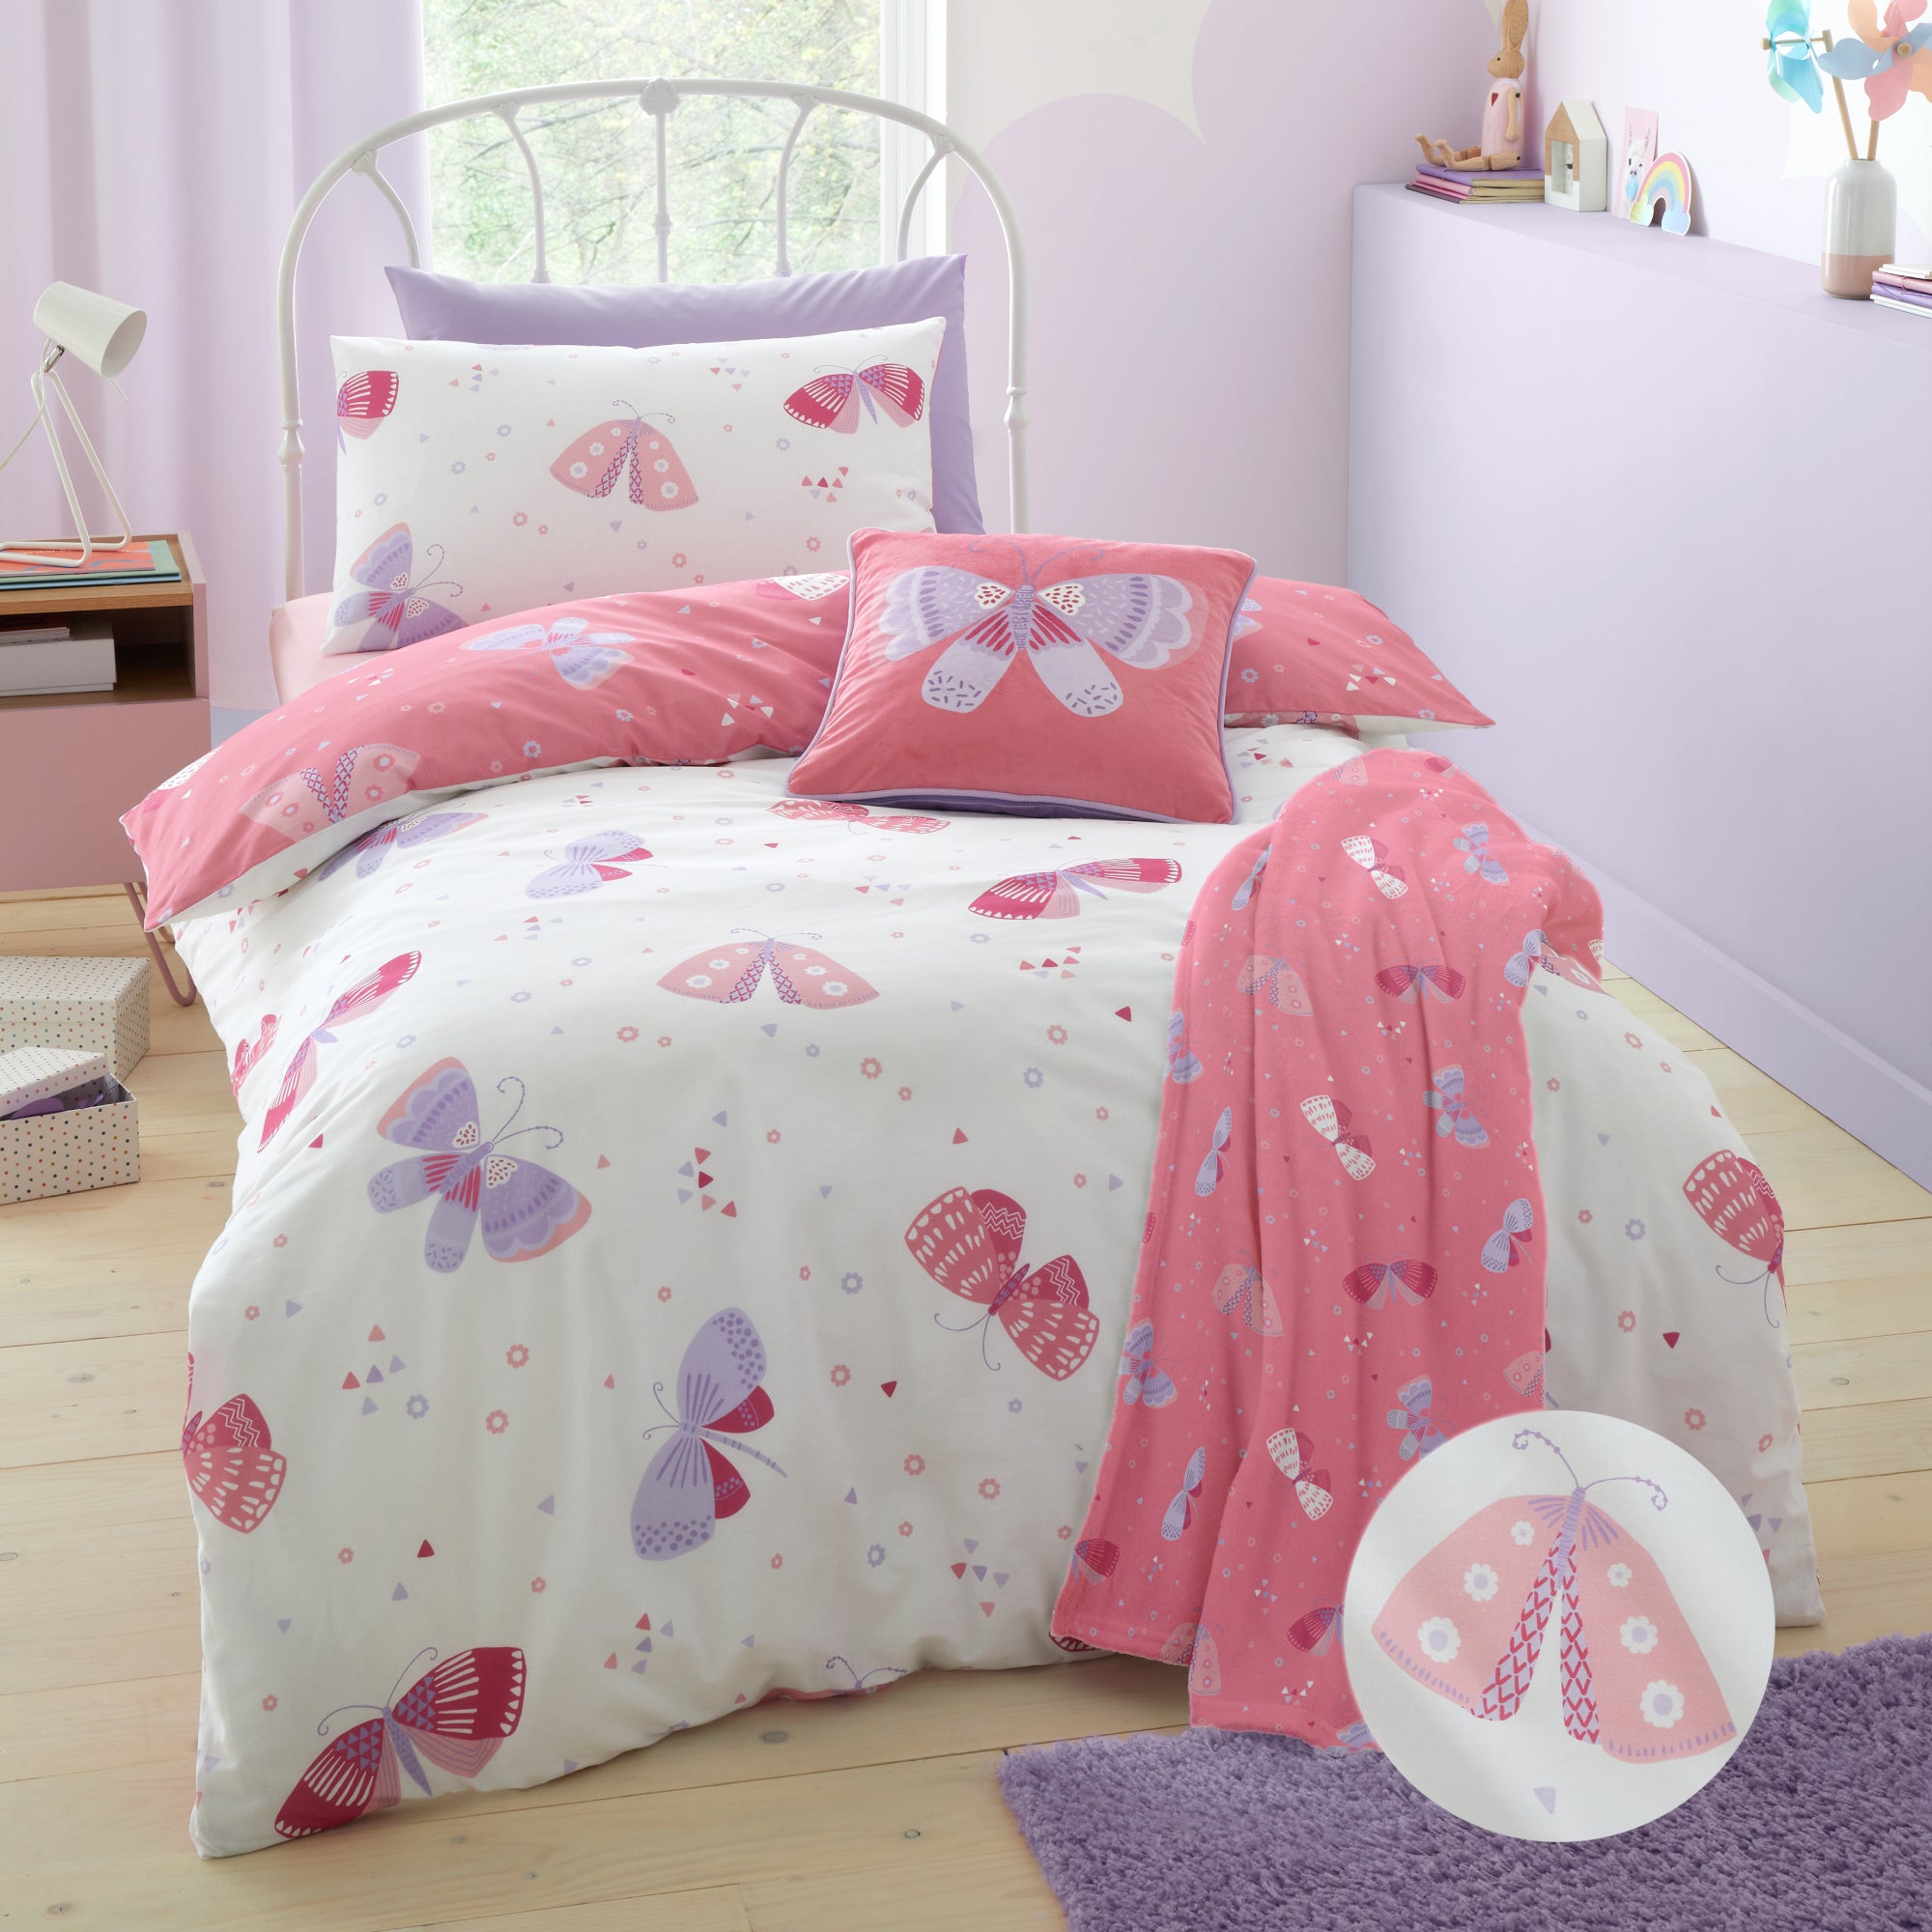 Duvet Cover Set Flutterby Butterfly by Bedlam in Pink